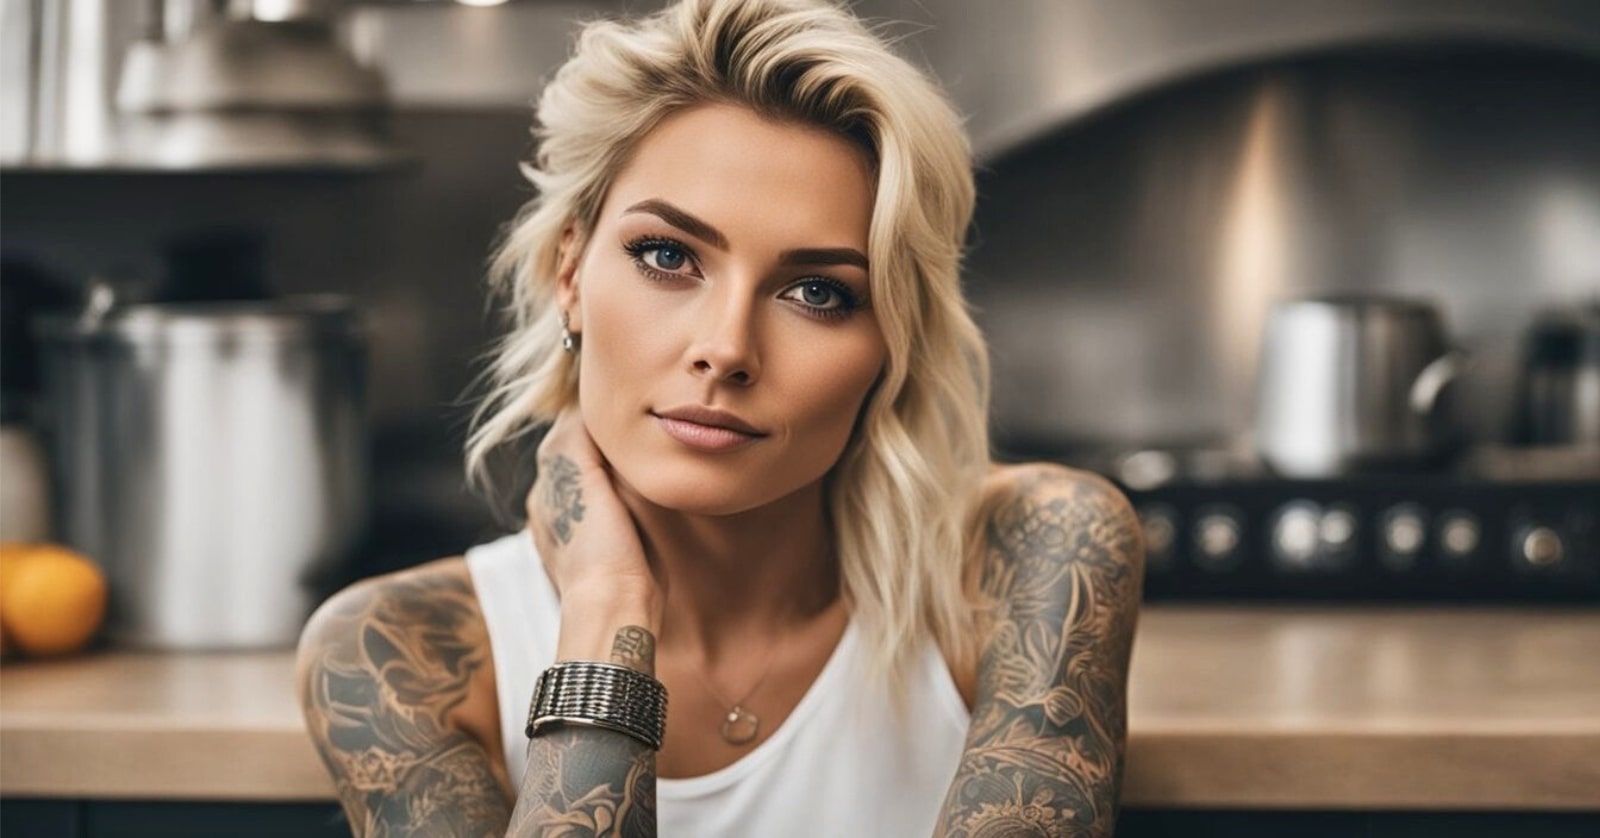 blonde woman with arm tattoos looking at camera in kitchen setting